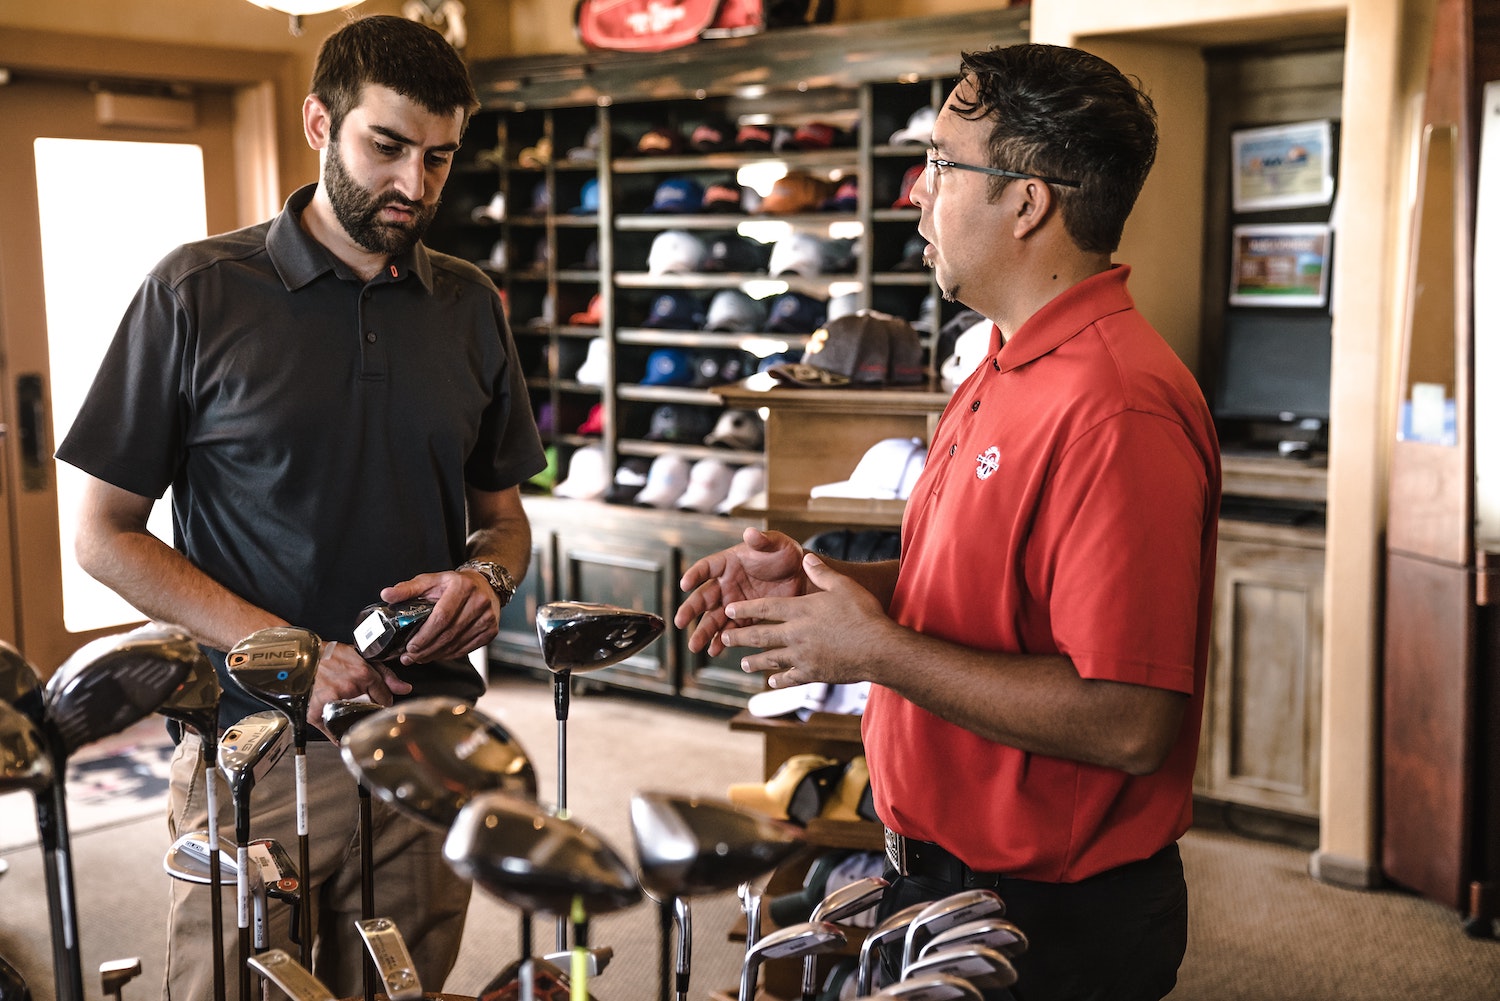 New To Golf? Five Things You Should Know Before Buying Your First Set Of Clubs